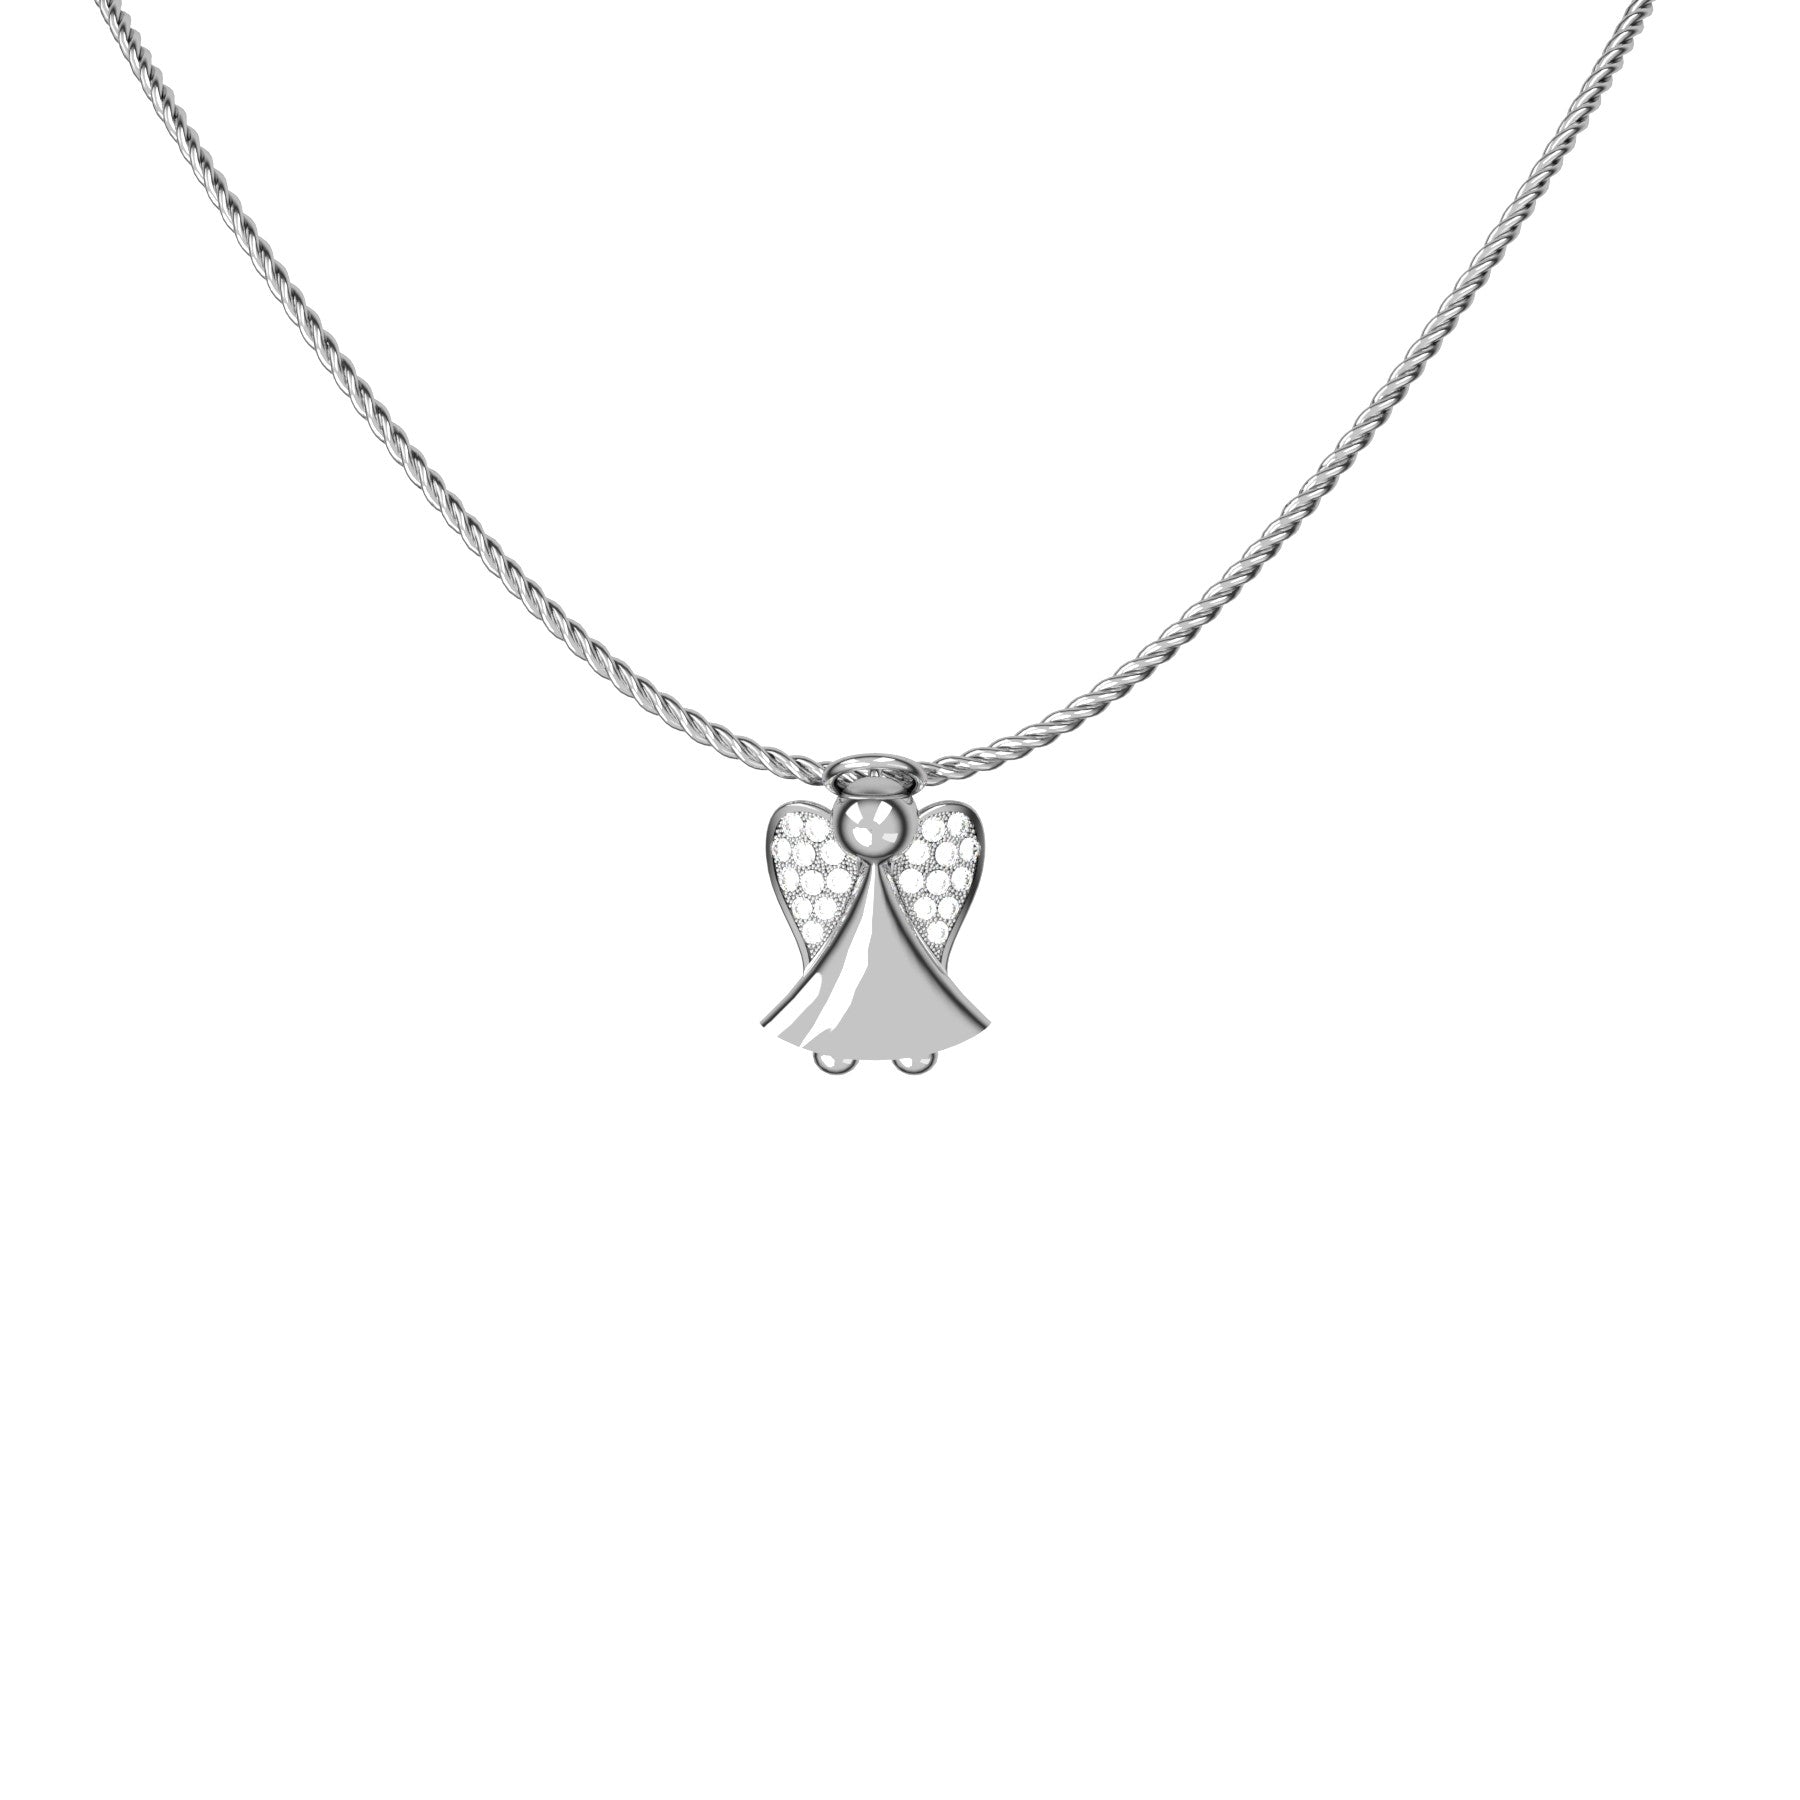 my guardian angel pendant, natural round diamonds, 18 K white gold, weight about 3,5 g (0.12 oz) size 13,4x19,3 mm